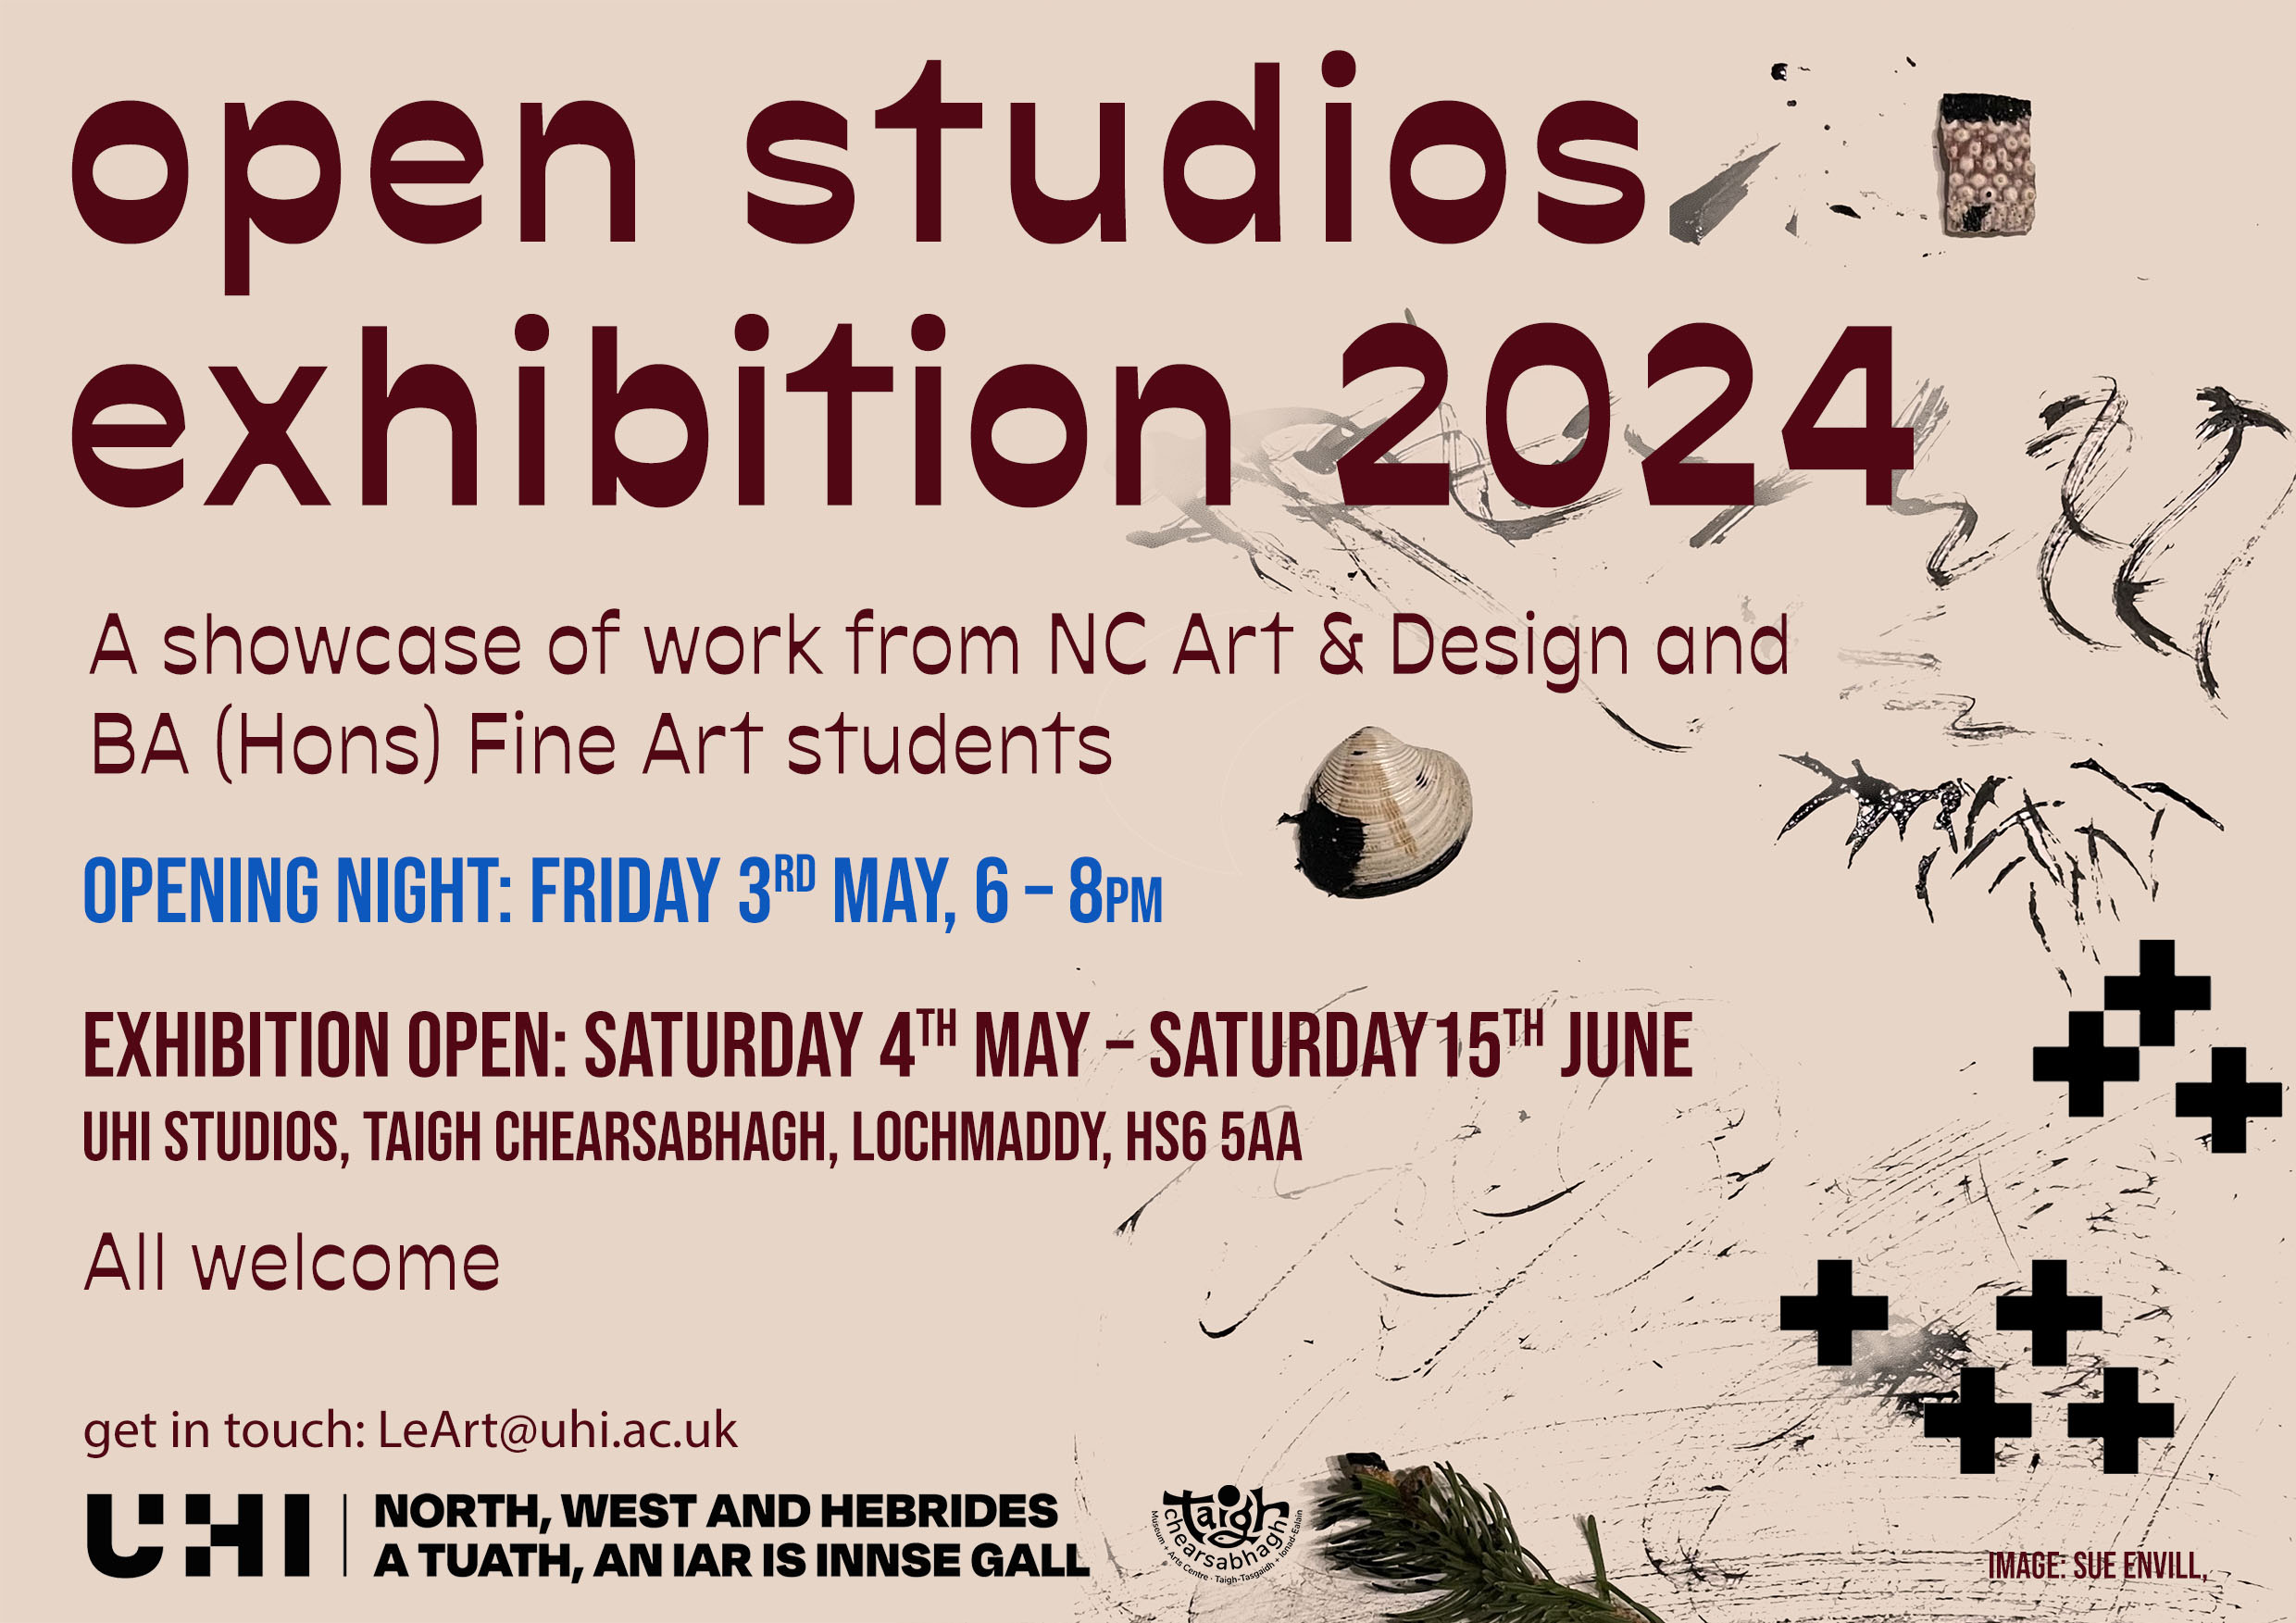 open studios exhibition 2024, a showcase of work from NC Art and Design and BA (Hons) Fine Art Students. Opening night Friday 3rd May 6pm-8pm, exhibition open Saturday 4th May - Saturday 15th June. UHI Studios, Taigh Chearsabhagh, Lochmaddy, HS6 5AA, All welcome, get in touch at LeArt@uhi.ac.uk. Image by Sue Envill. UHI North, West and Hebrides logo